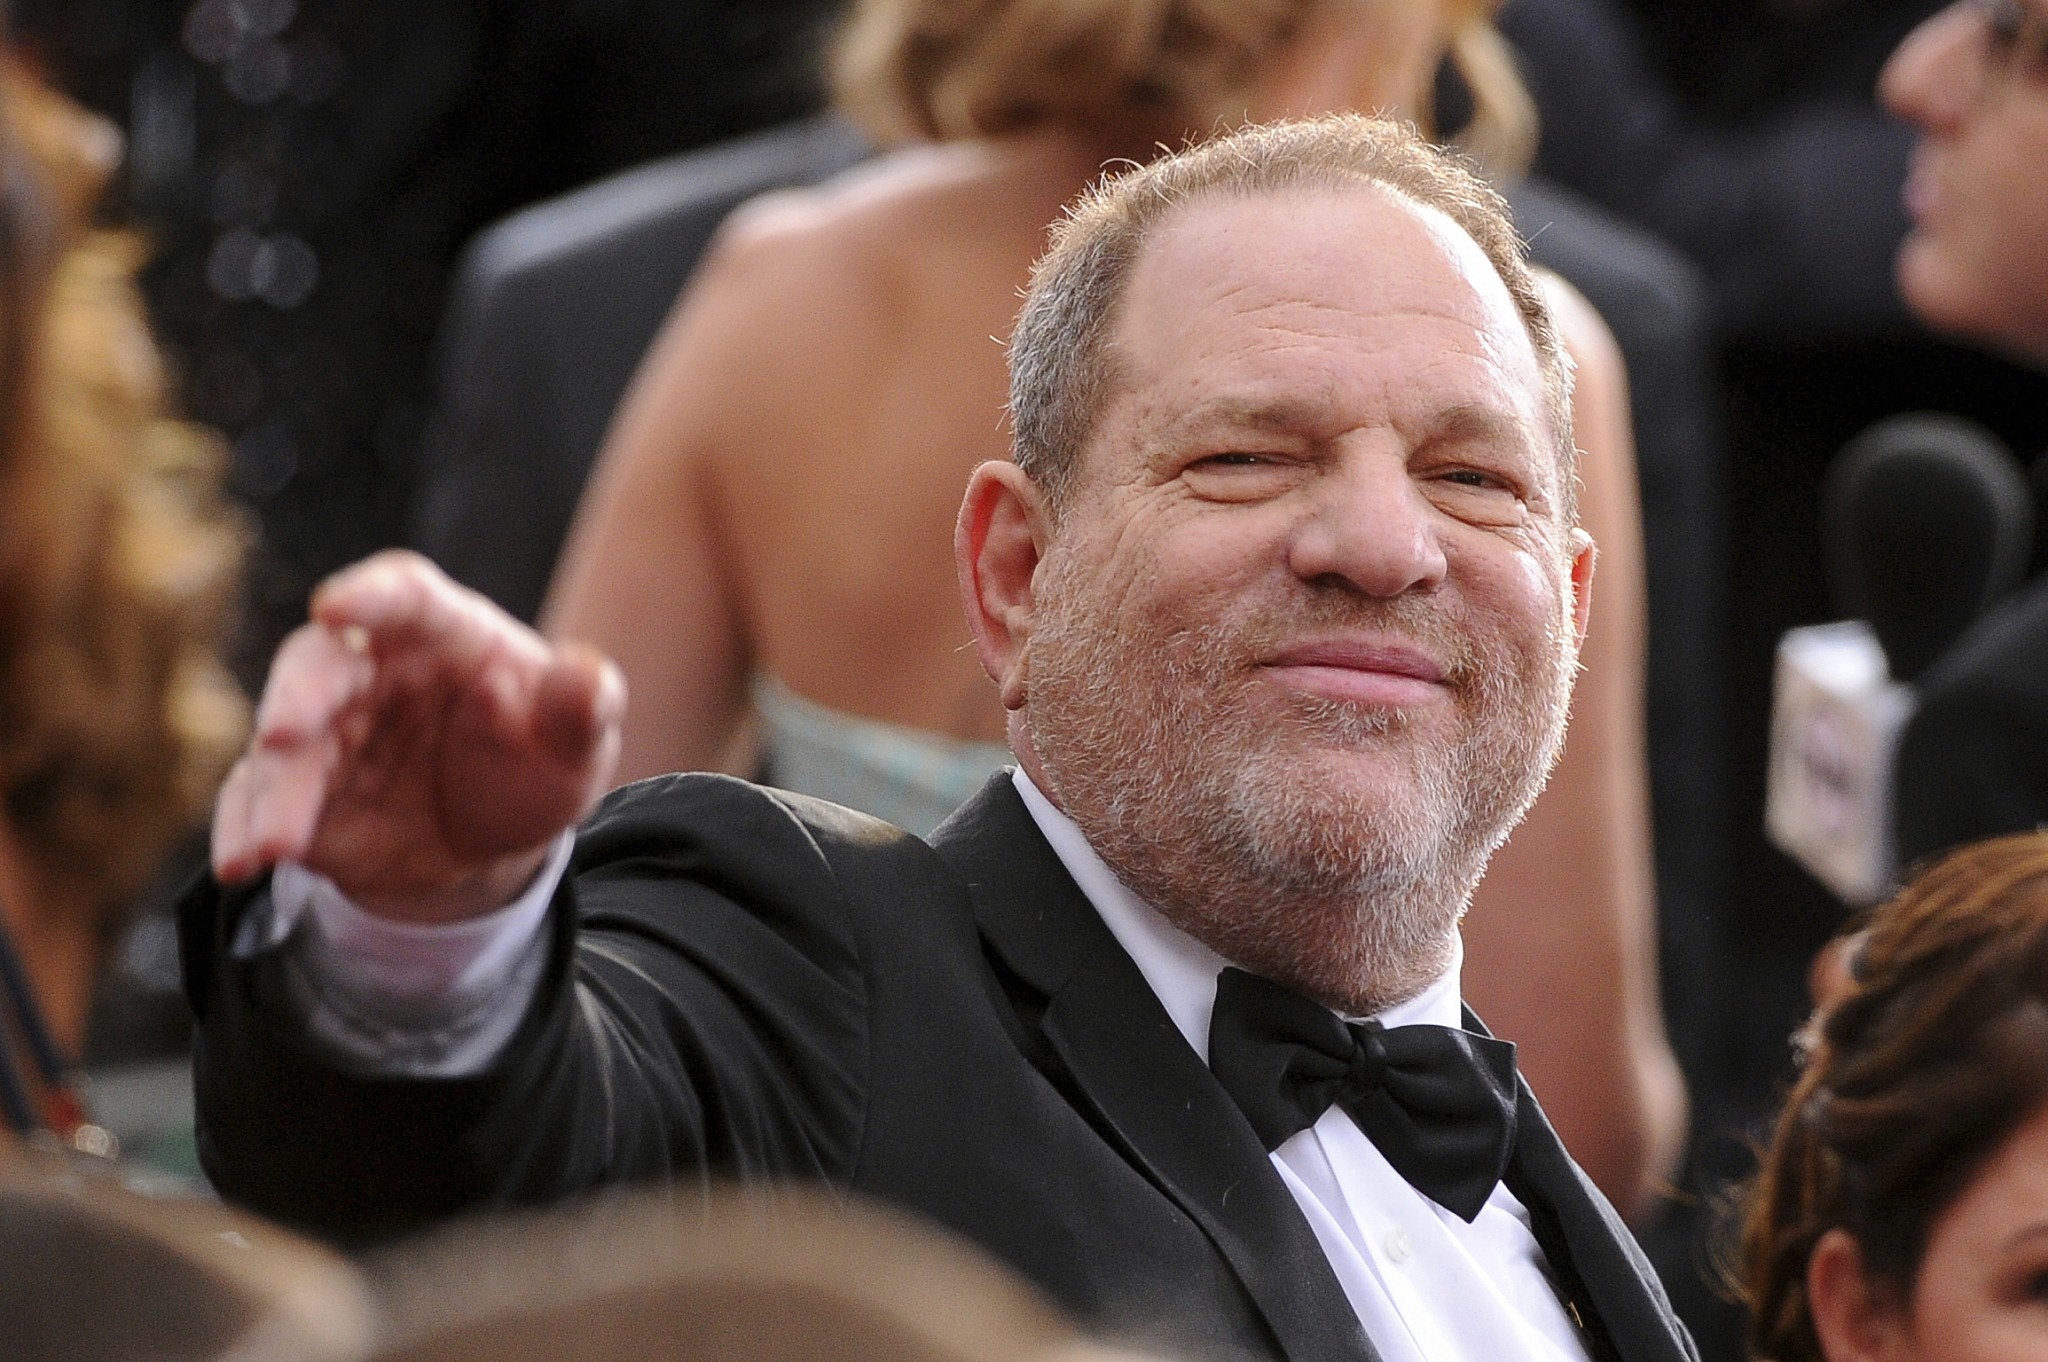 Harvey Weinstein arrives at the Oscars at the Dolby Theatre in Los Angeles, February 22, 2015. (Vince Bucci/Invision/AP)